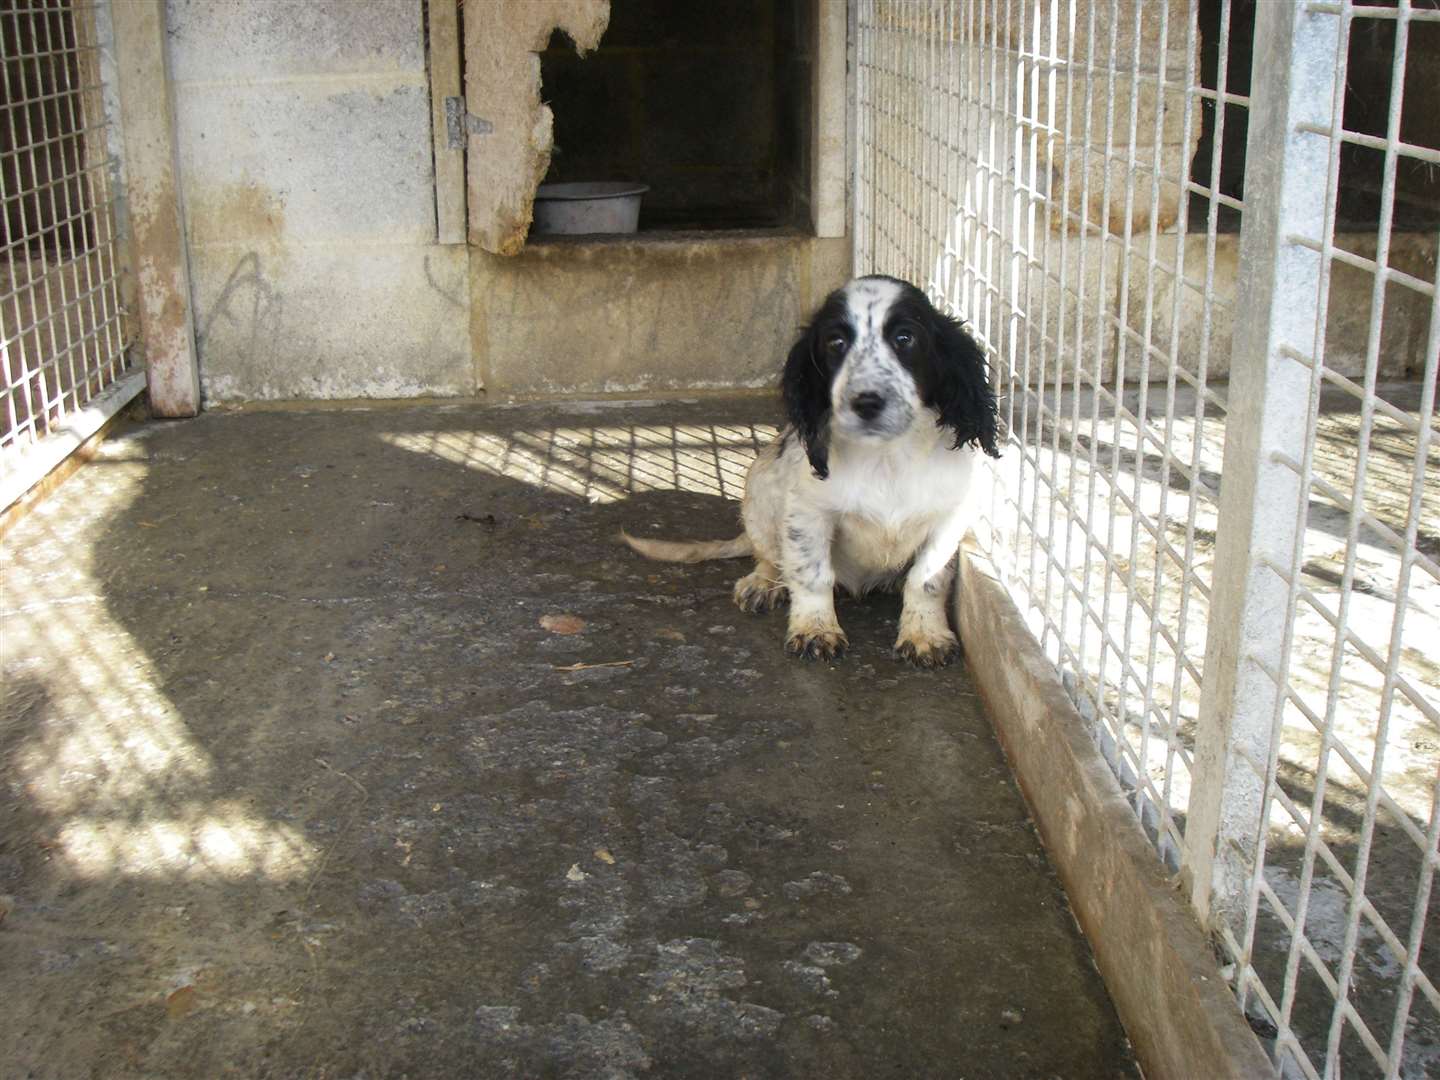 Many animals were stored in small cages without beds or toys. Picture: RSPCA (15157828)